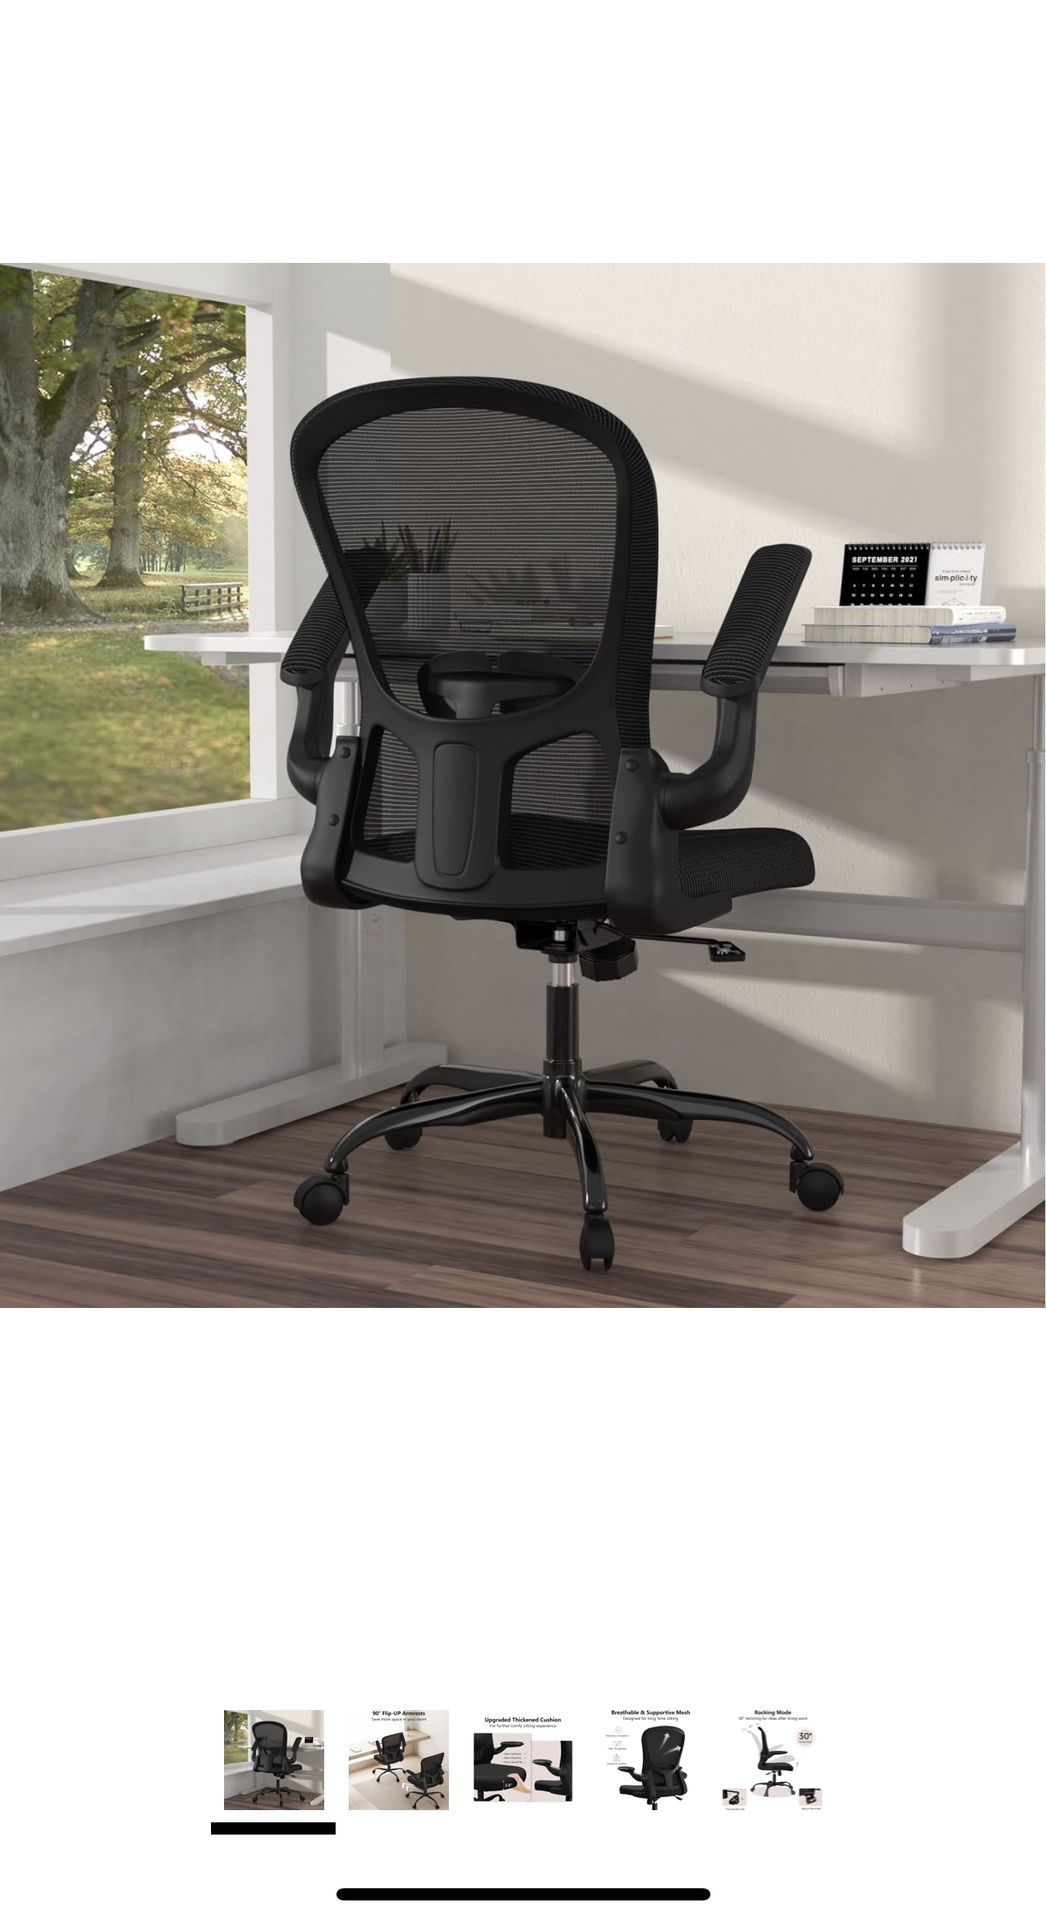 Ergonomic Office Chair, Comfort Swivel Home Office Task Chair, Breathable Mesh Desk Chair, Lumbar Support Computer Chair with Flip-up Arms and Adjusta